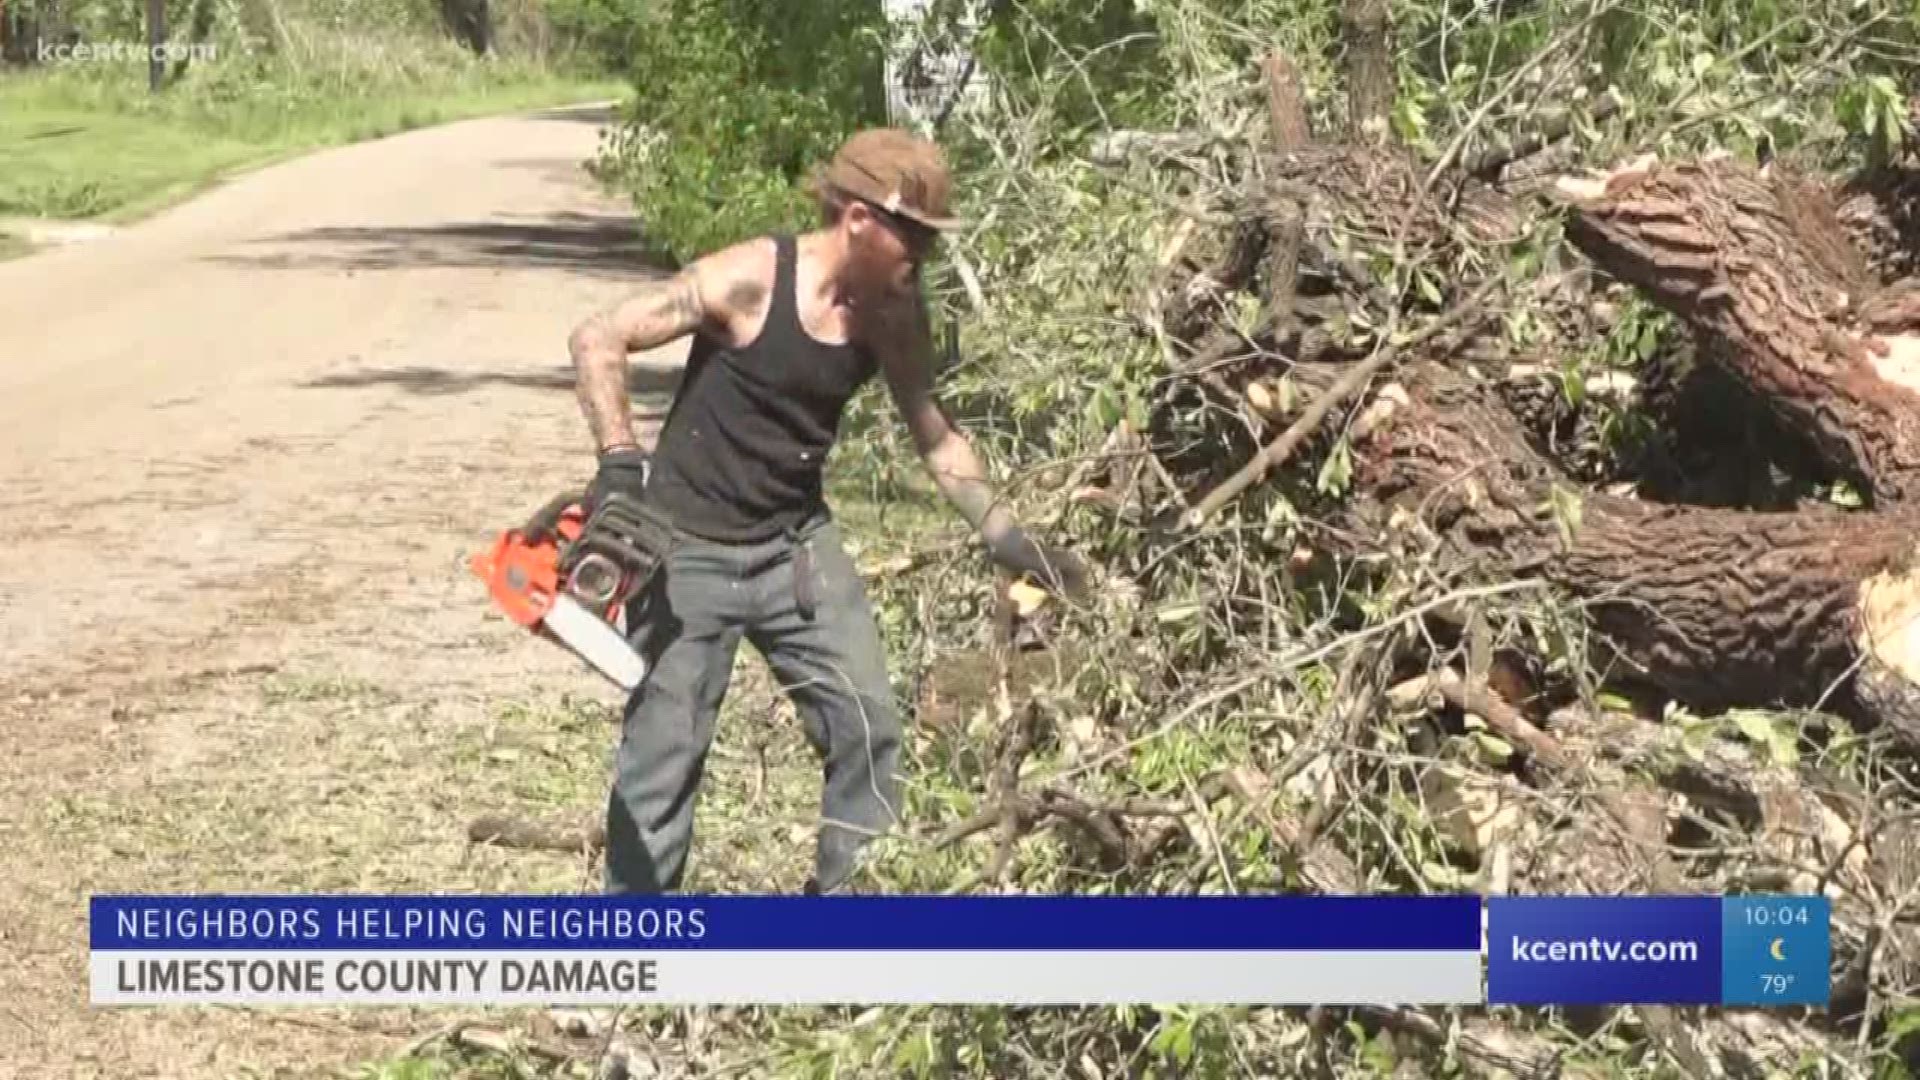 Joey Platt didn't know how he was going to get a fallen 50 foot tree off of his driveway. Fortunately, a good Samaritan stepped in.